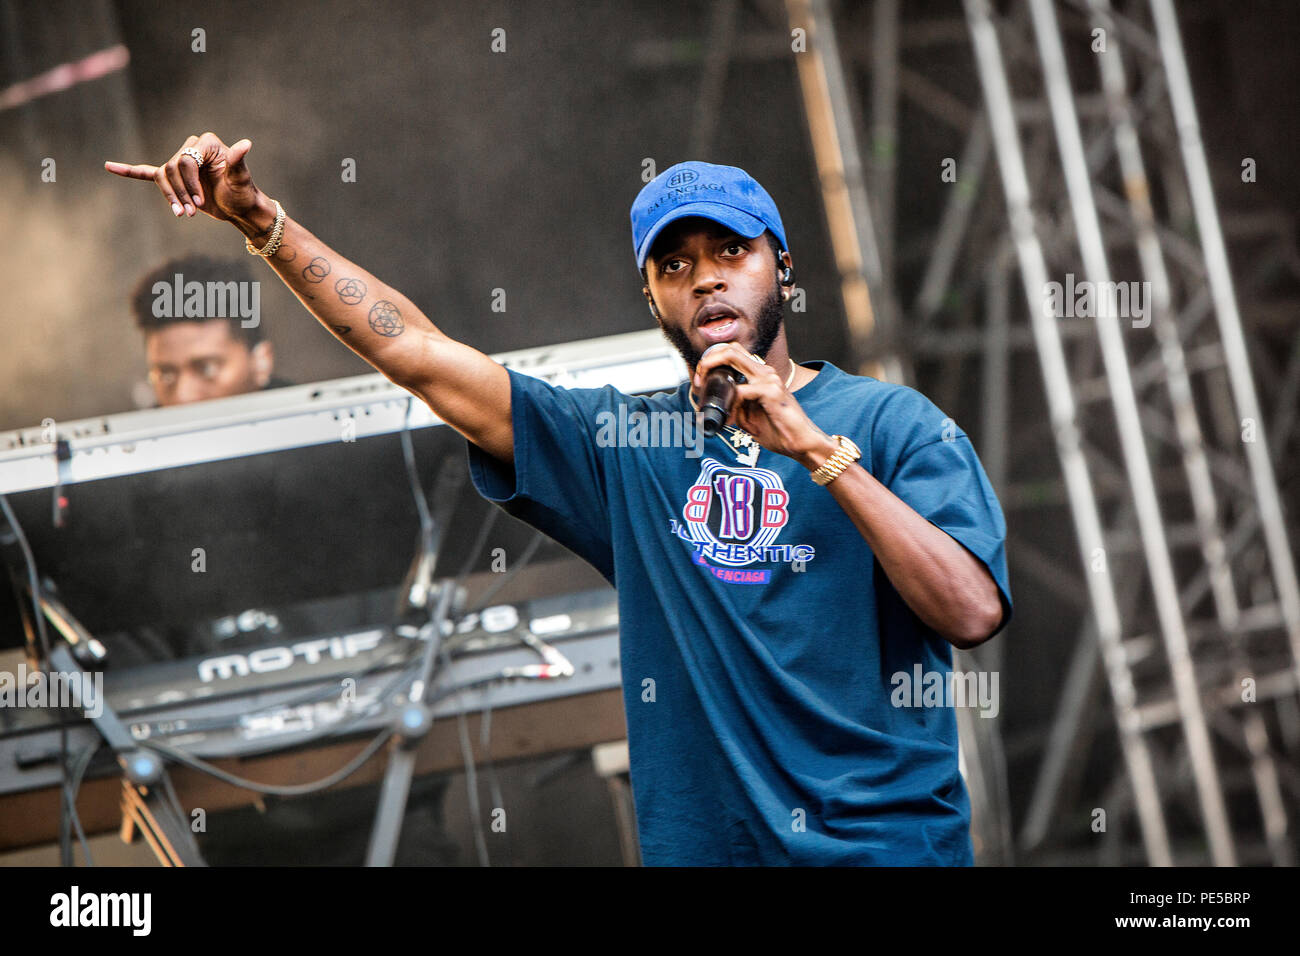 Norway, Oslo - August 09, 2018. The American rapper 6lack performs a live concert during the Norwegian music festival Øyafestivalen 2018 in Oslo. (Photo credit: Gonzales Photo - Terje Dokken). Stock Photo